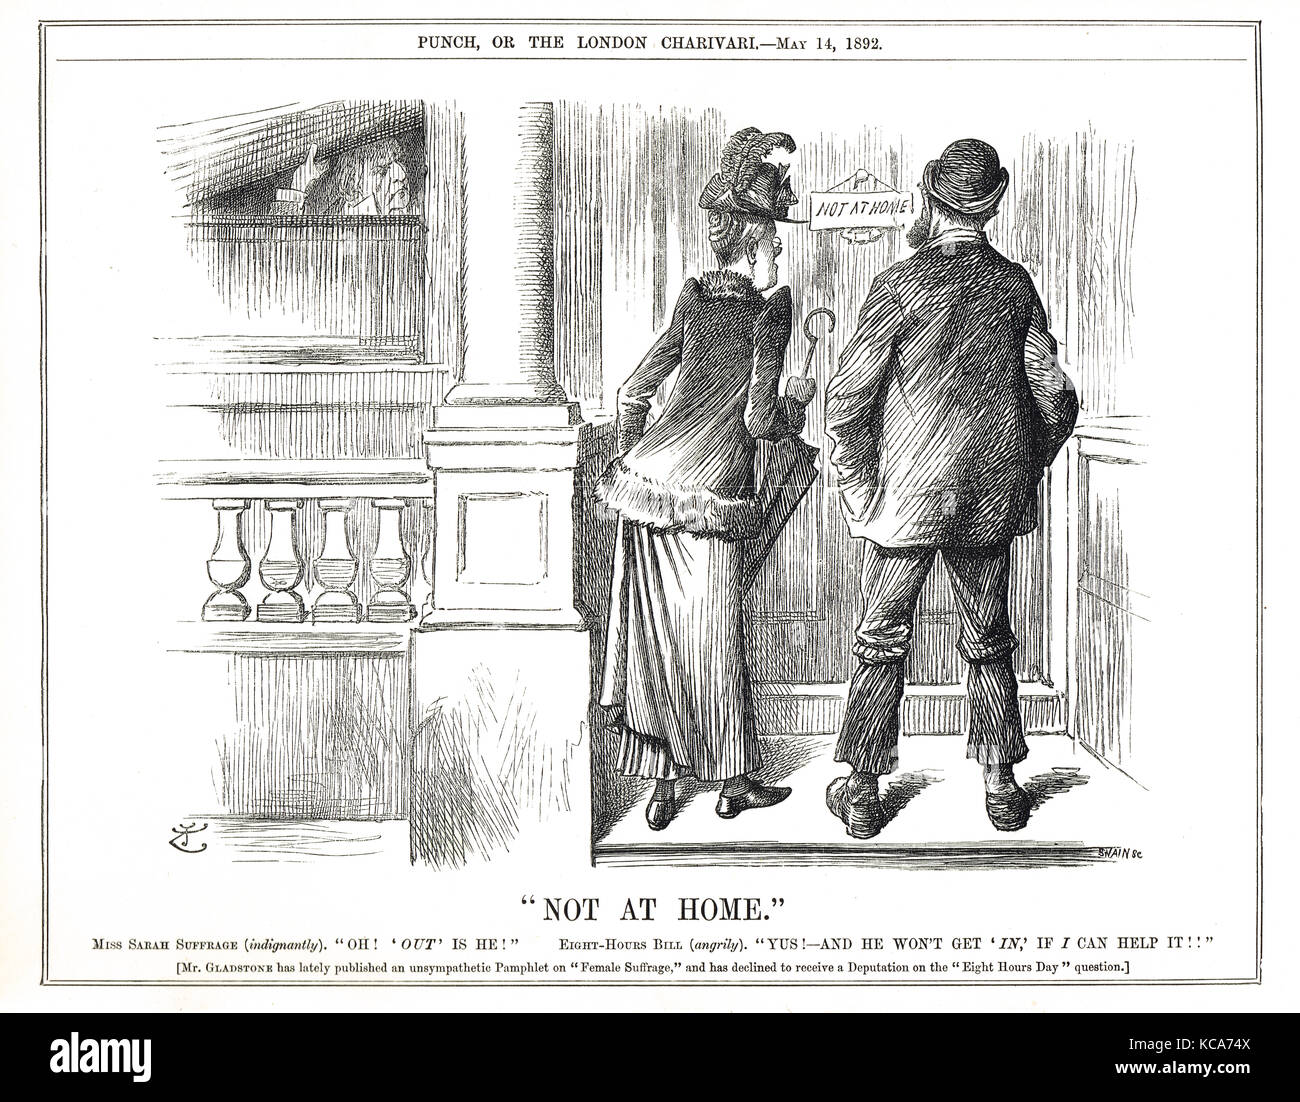 William Gladstone hiding from campaigners for female suffrage and an eight hour working day, Punch cartoon 1892 Stock Photo